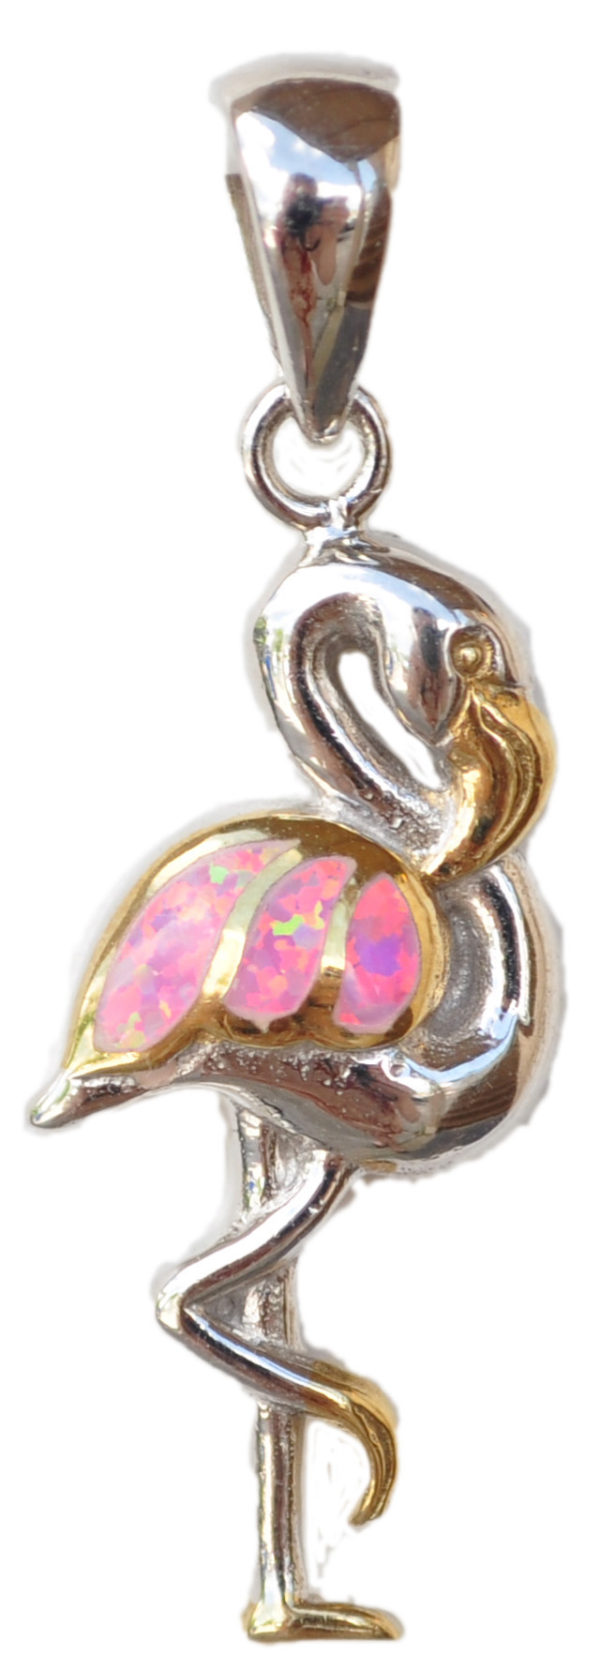 Sterling silver and 18kt gold Petite Flamingo Pendant with opals by kovel